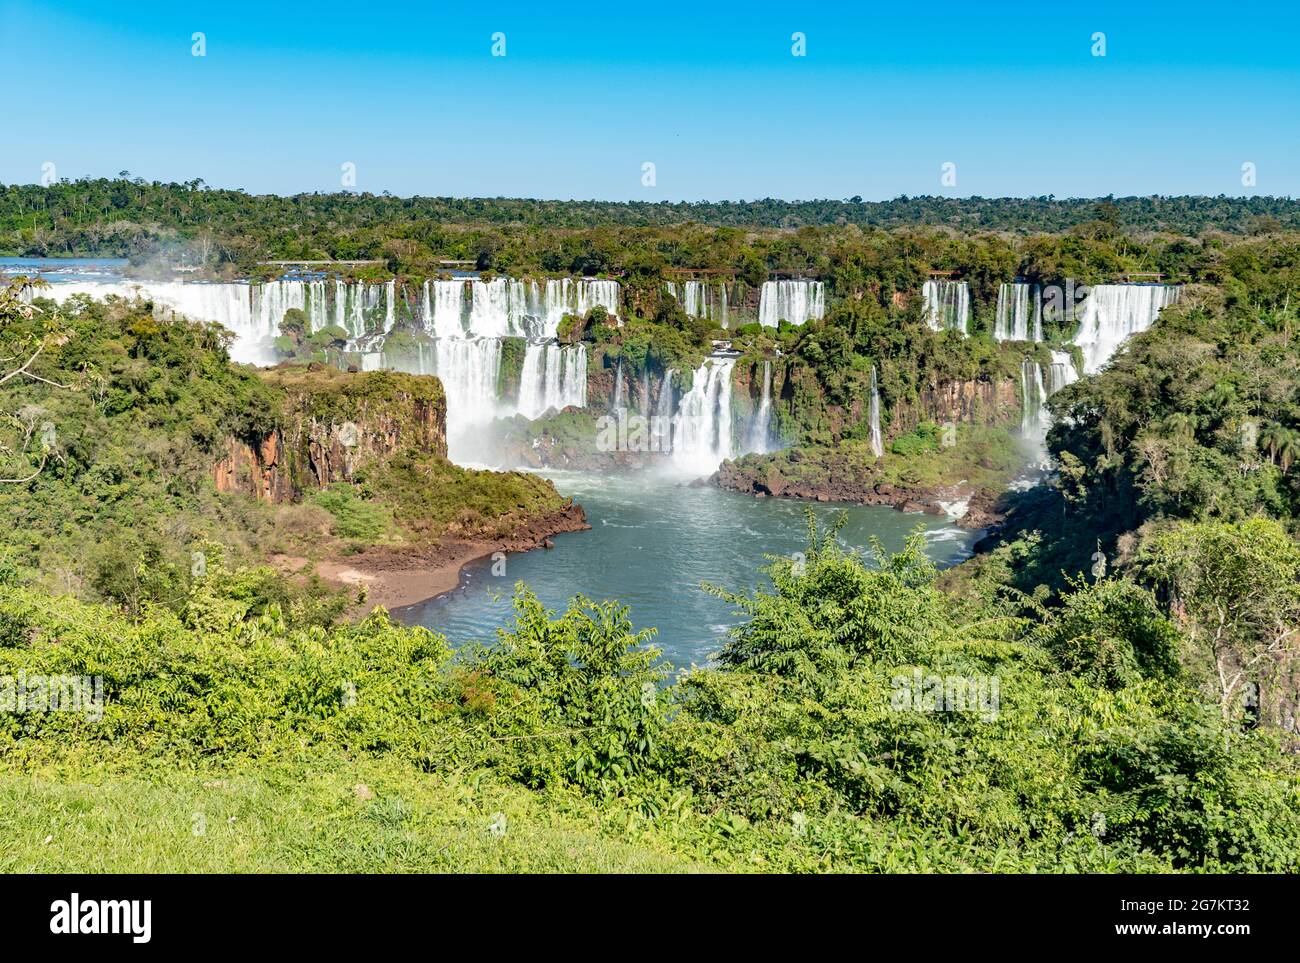 Scenic view of Iguazu Falls as seen from the Brazilian side Stock Photo